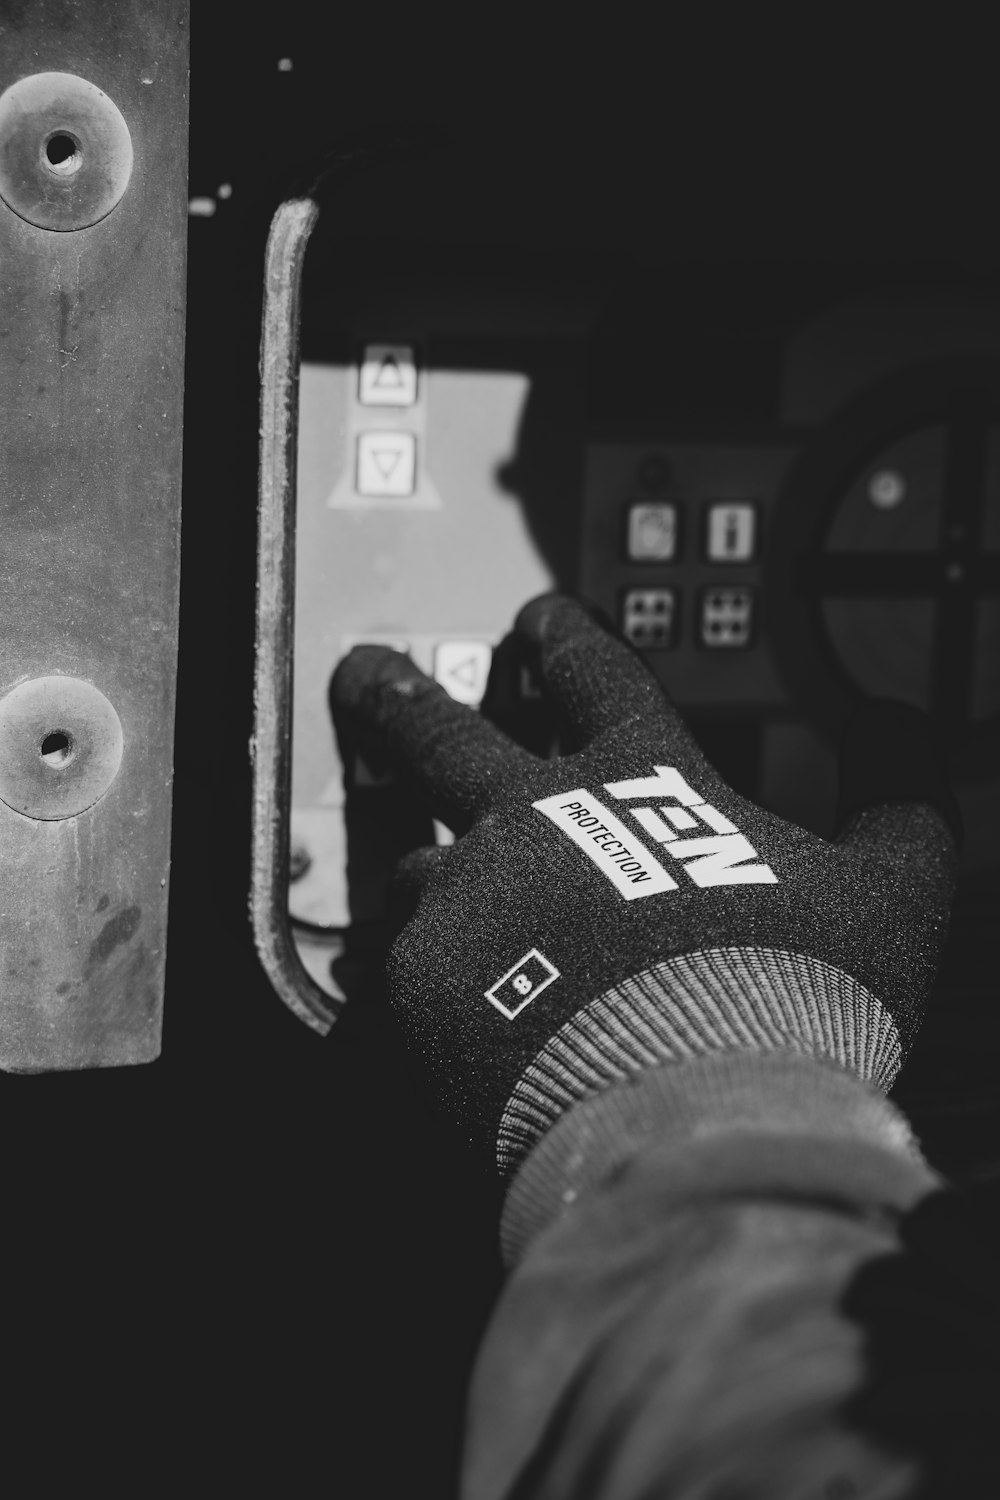 a person wearing a glove is working on a machine